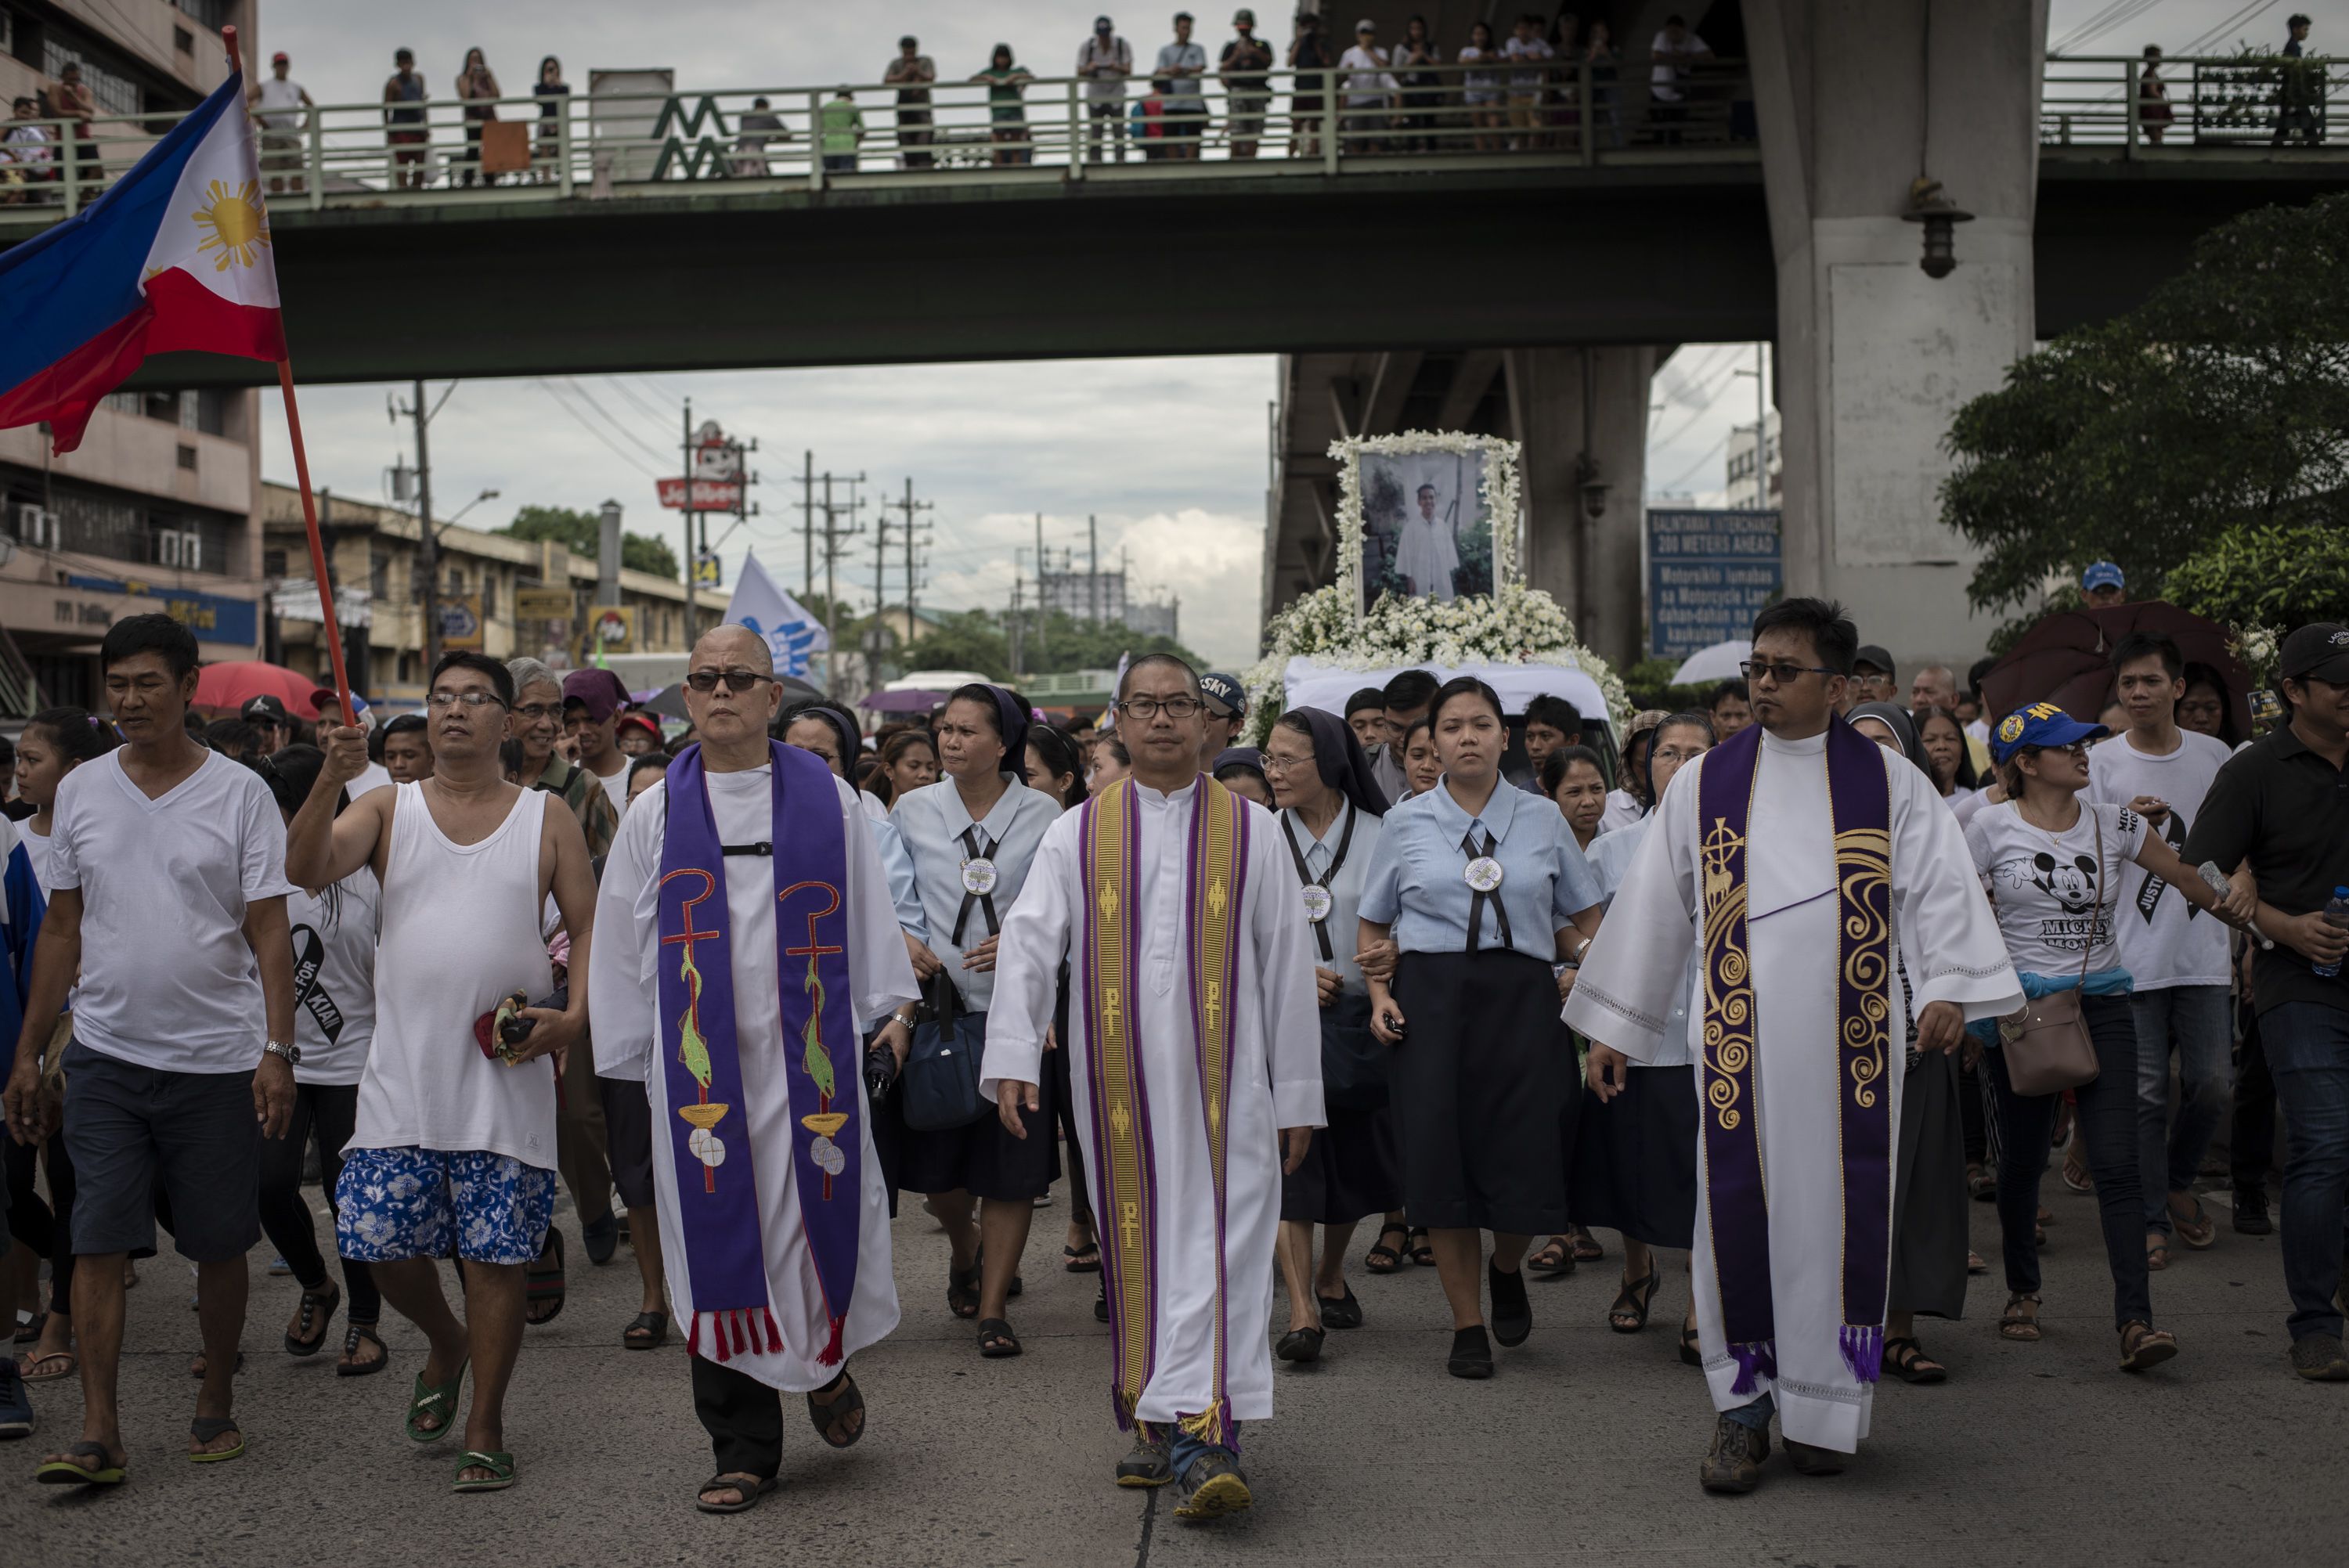 Catholic priests Robert Reyes (left) and Flavie Villanueva (center) lead the funeral procession of seventeen-year-old Kian Loyd delos Santos, who was shot and killed by police. Image by Eloisa Lopez. Manila, 2017.